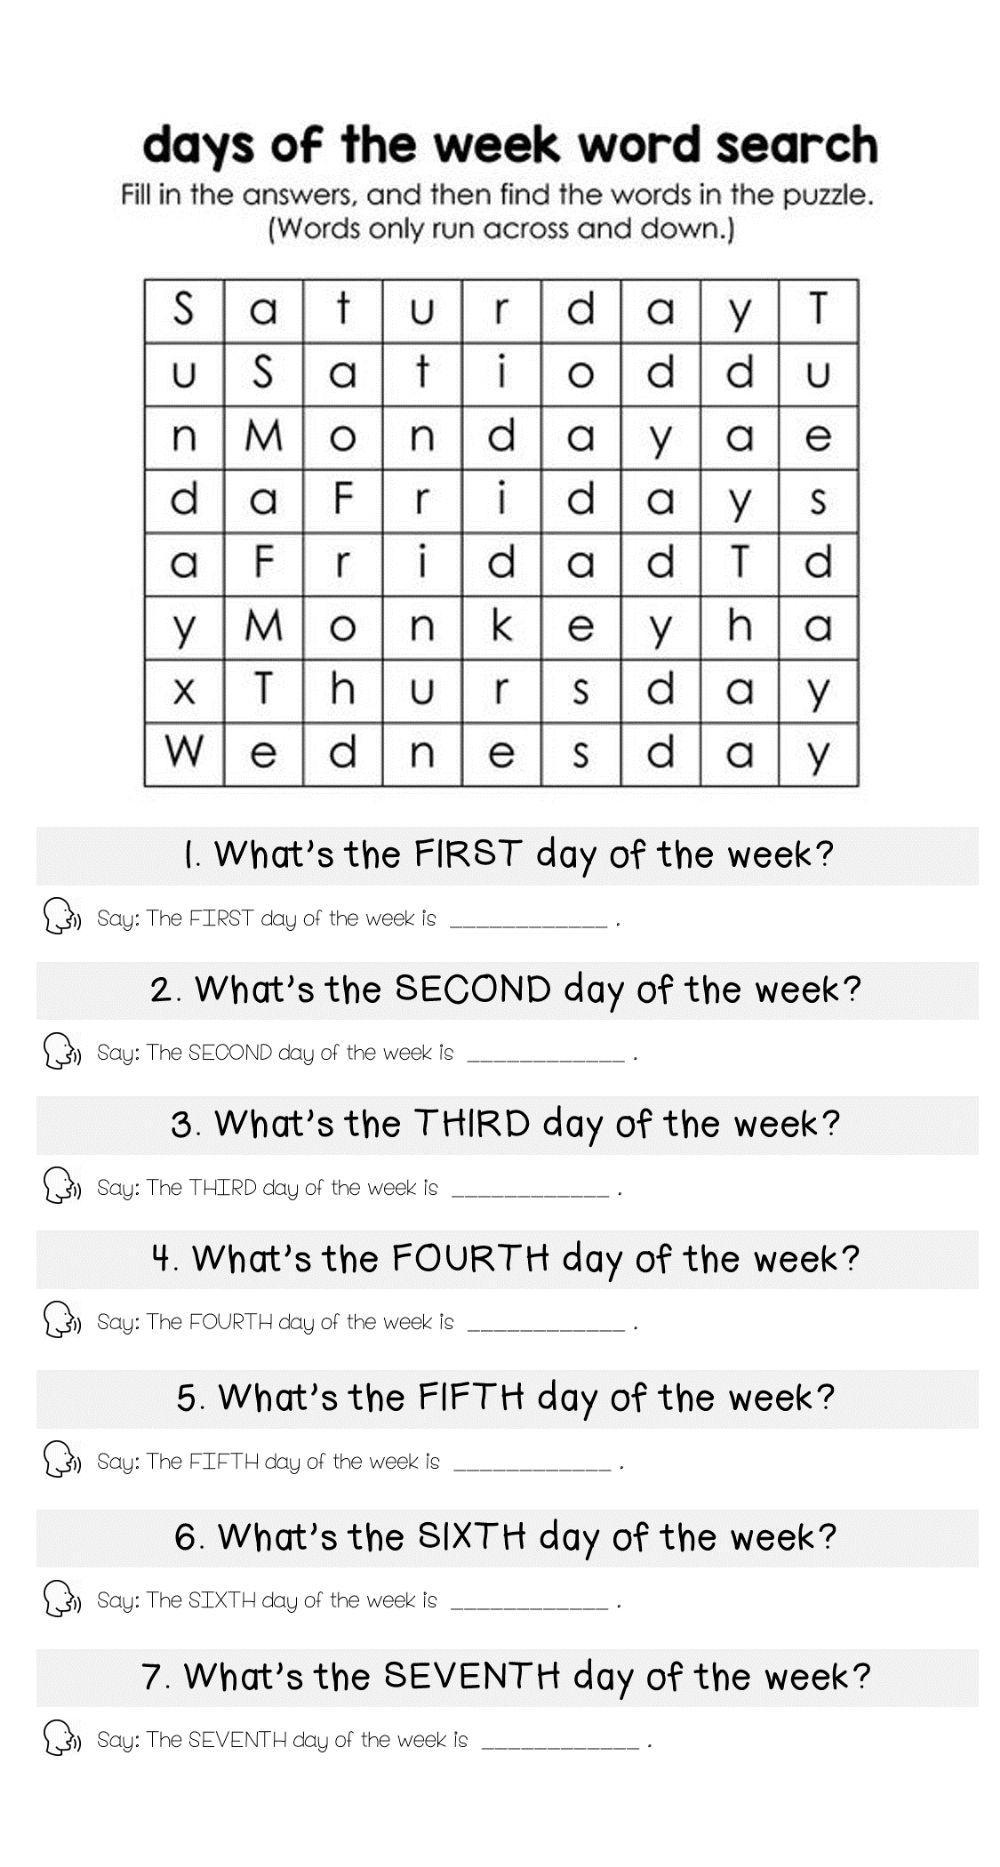 Days of the Week - Word Search - Speaking Activity